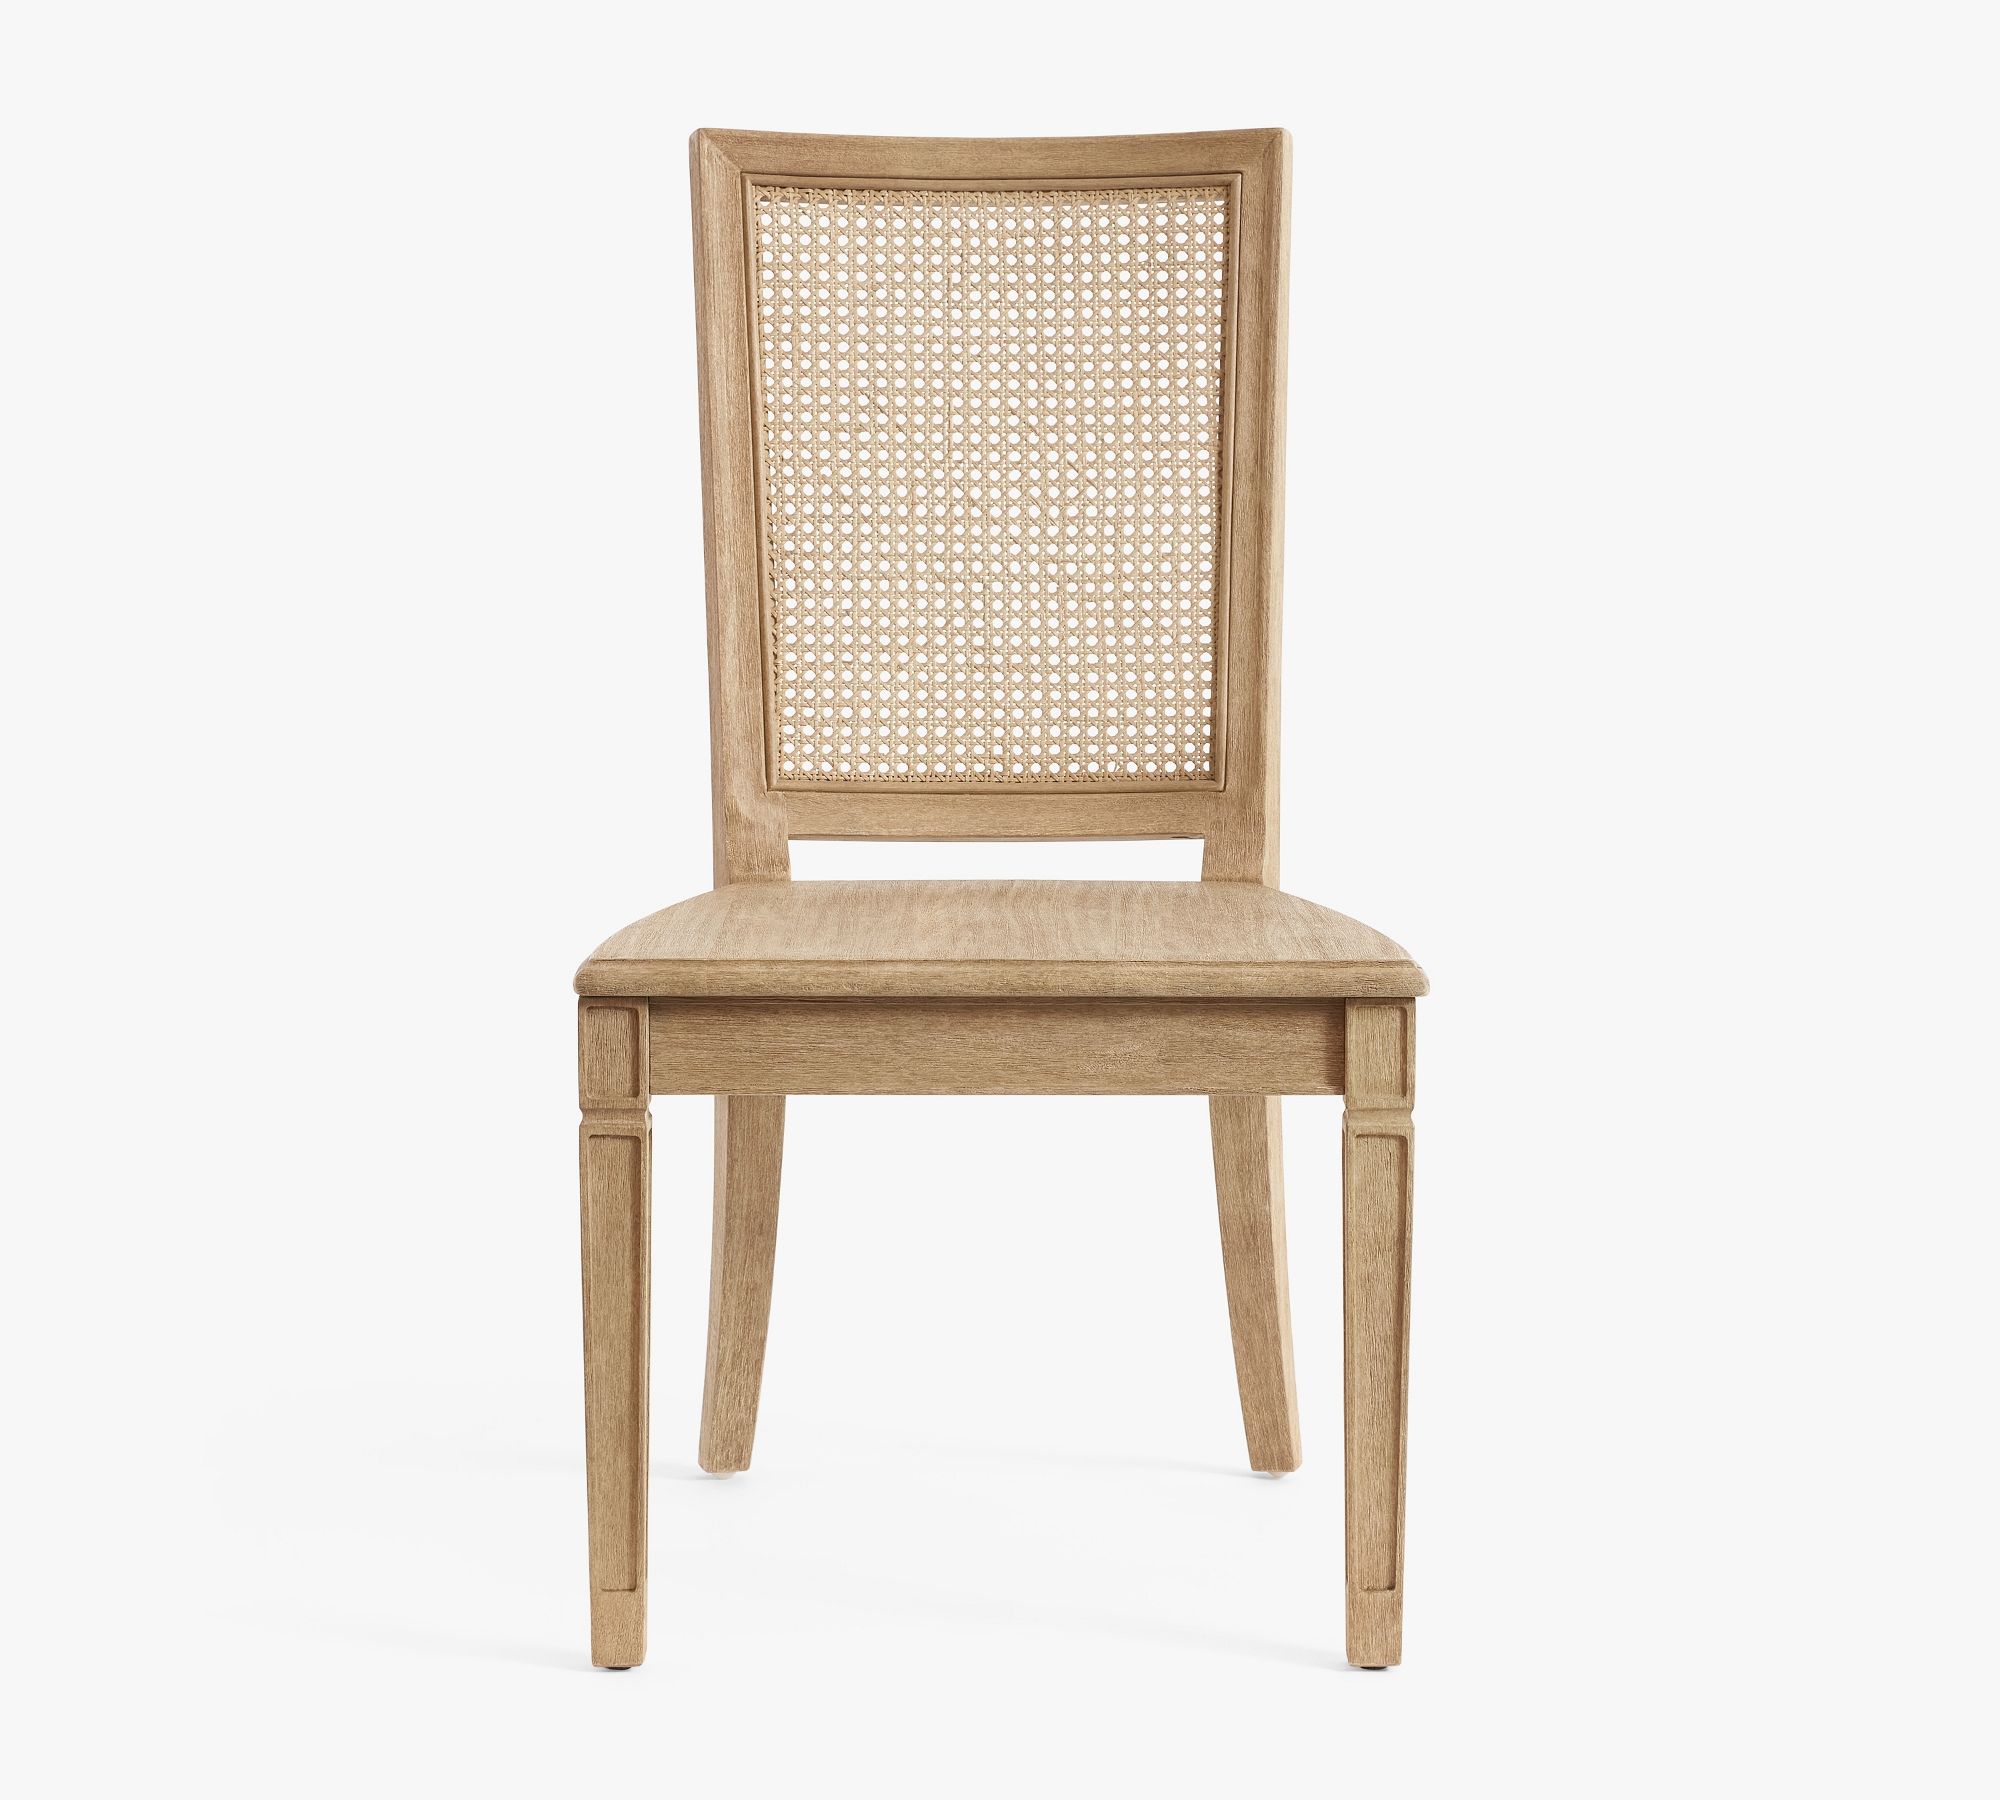 Sausalito Cane Square Back Dining Chair